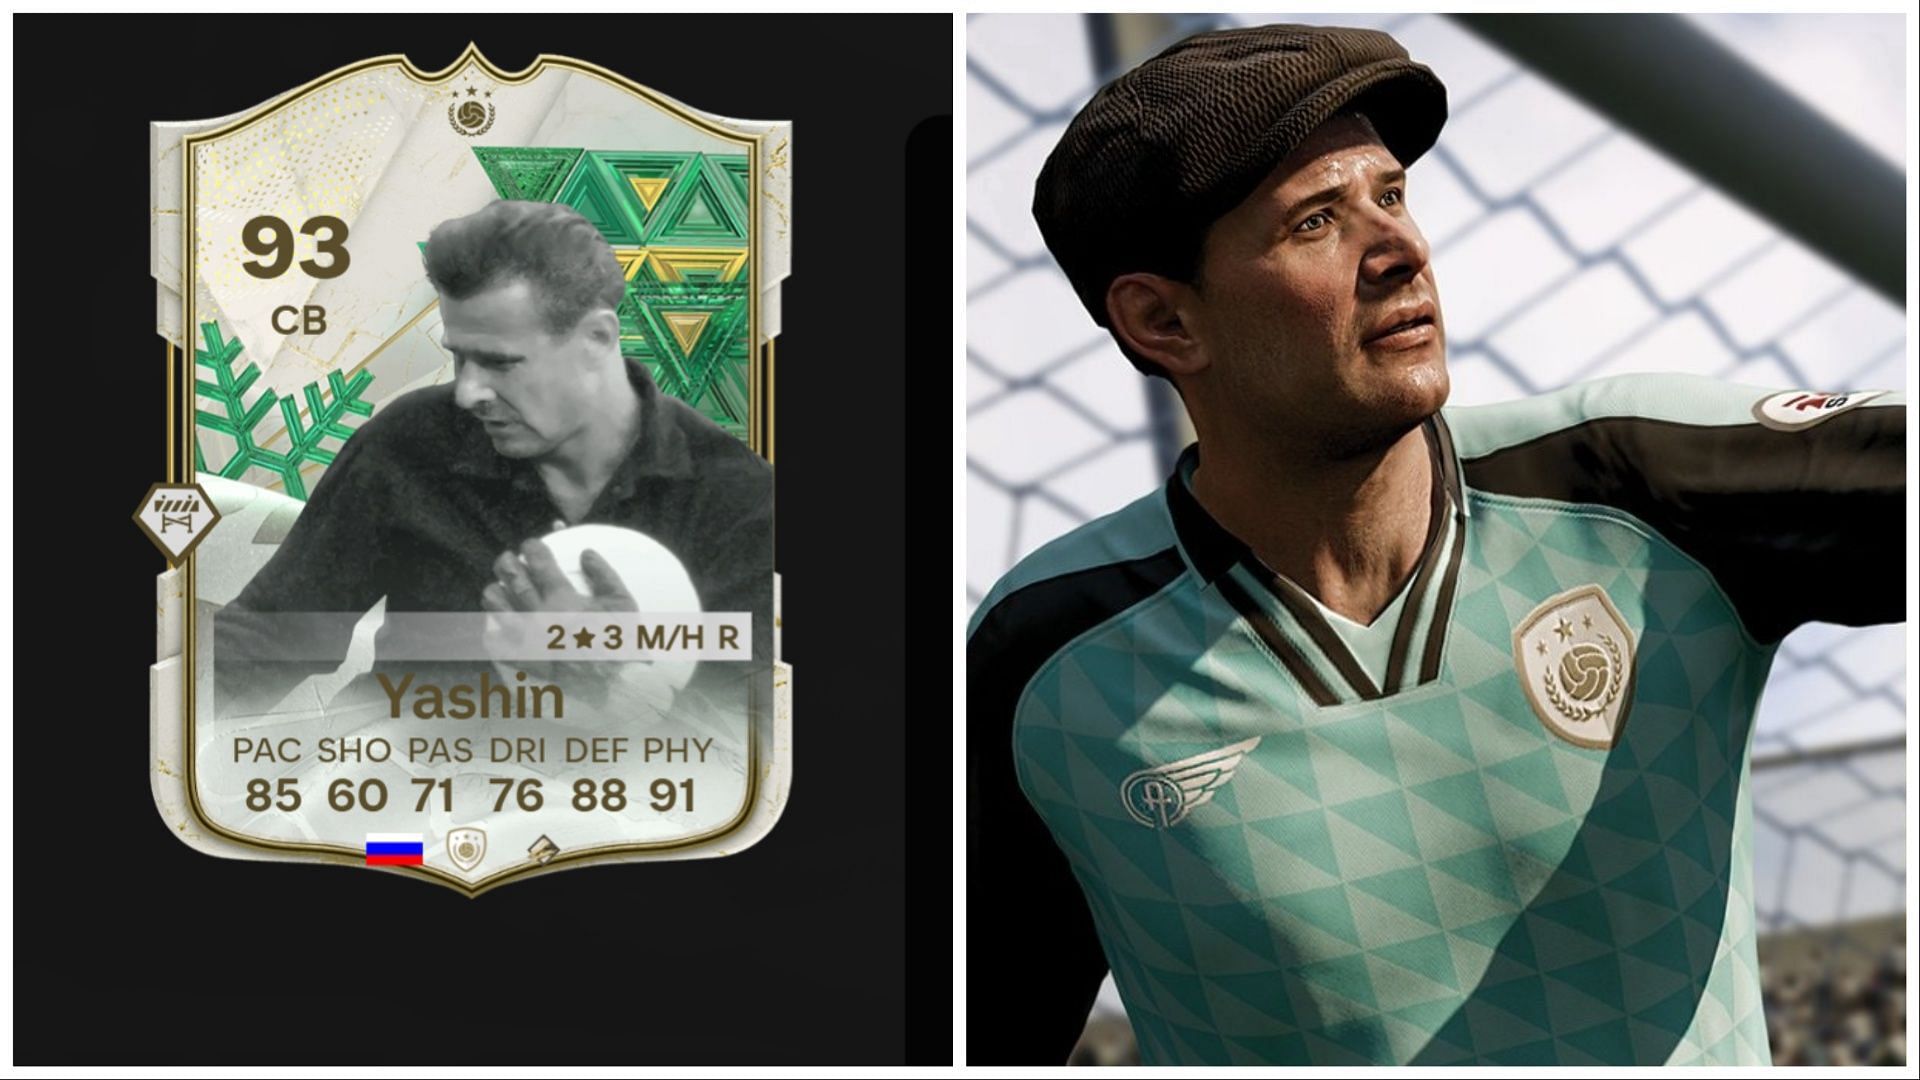 The EA FC 24 Lev Yashin Winter Wildcards Icon SBC has been leaked